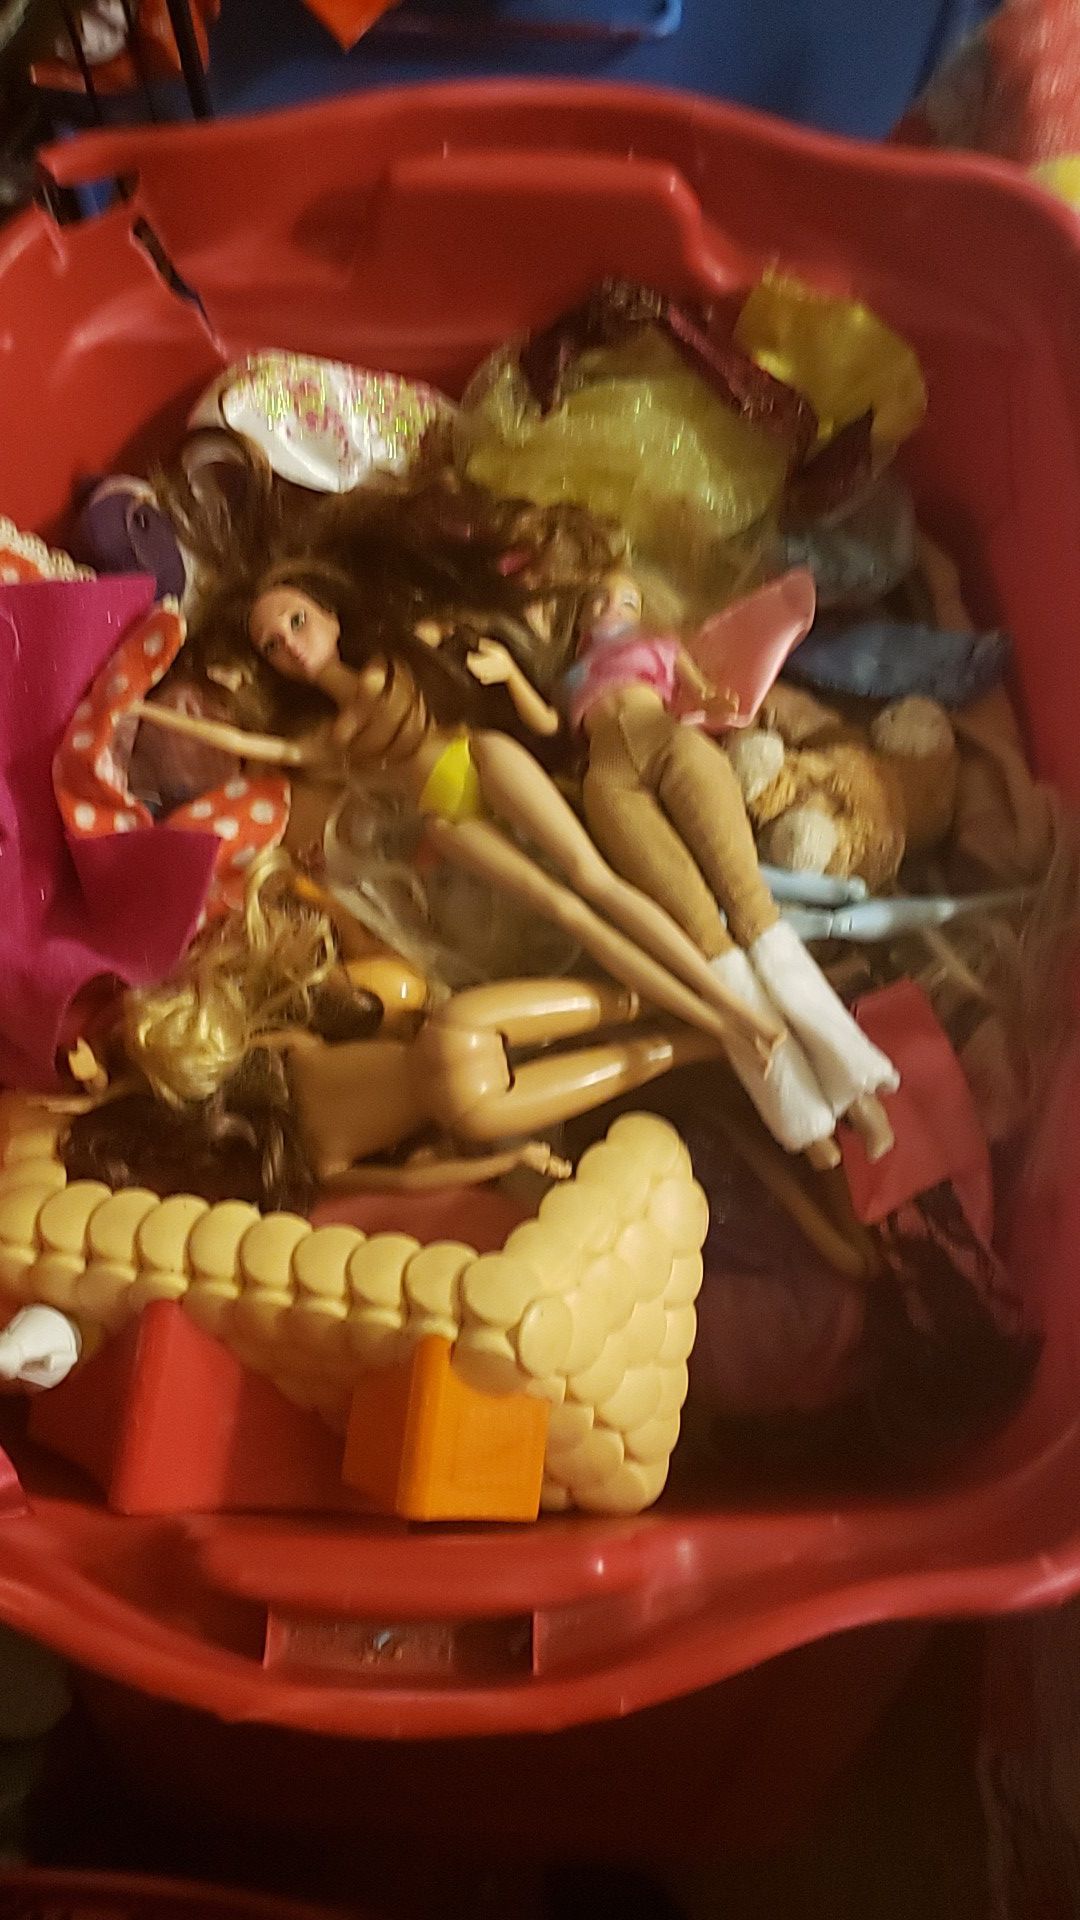 an entire tub full of Barbie's and clothes